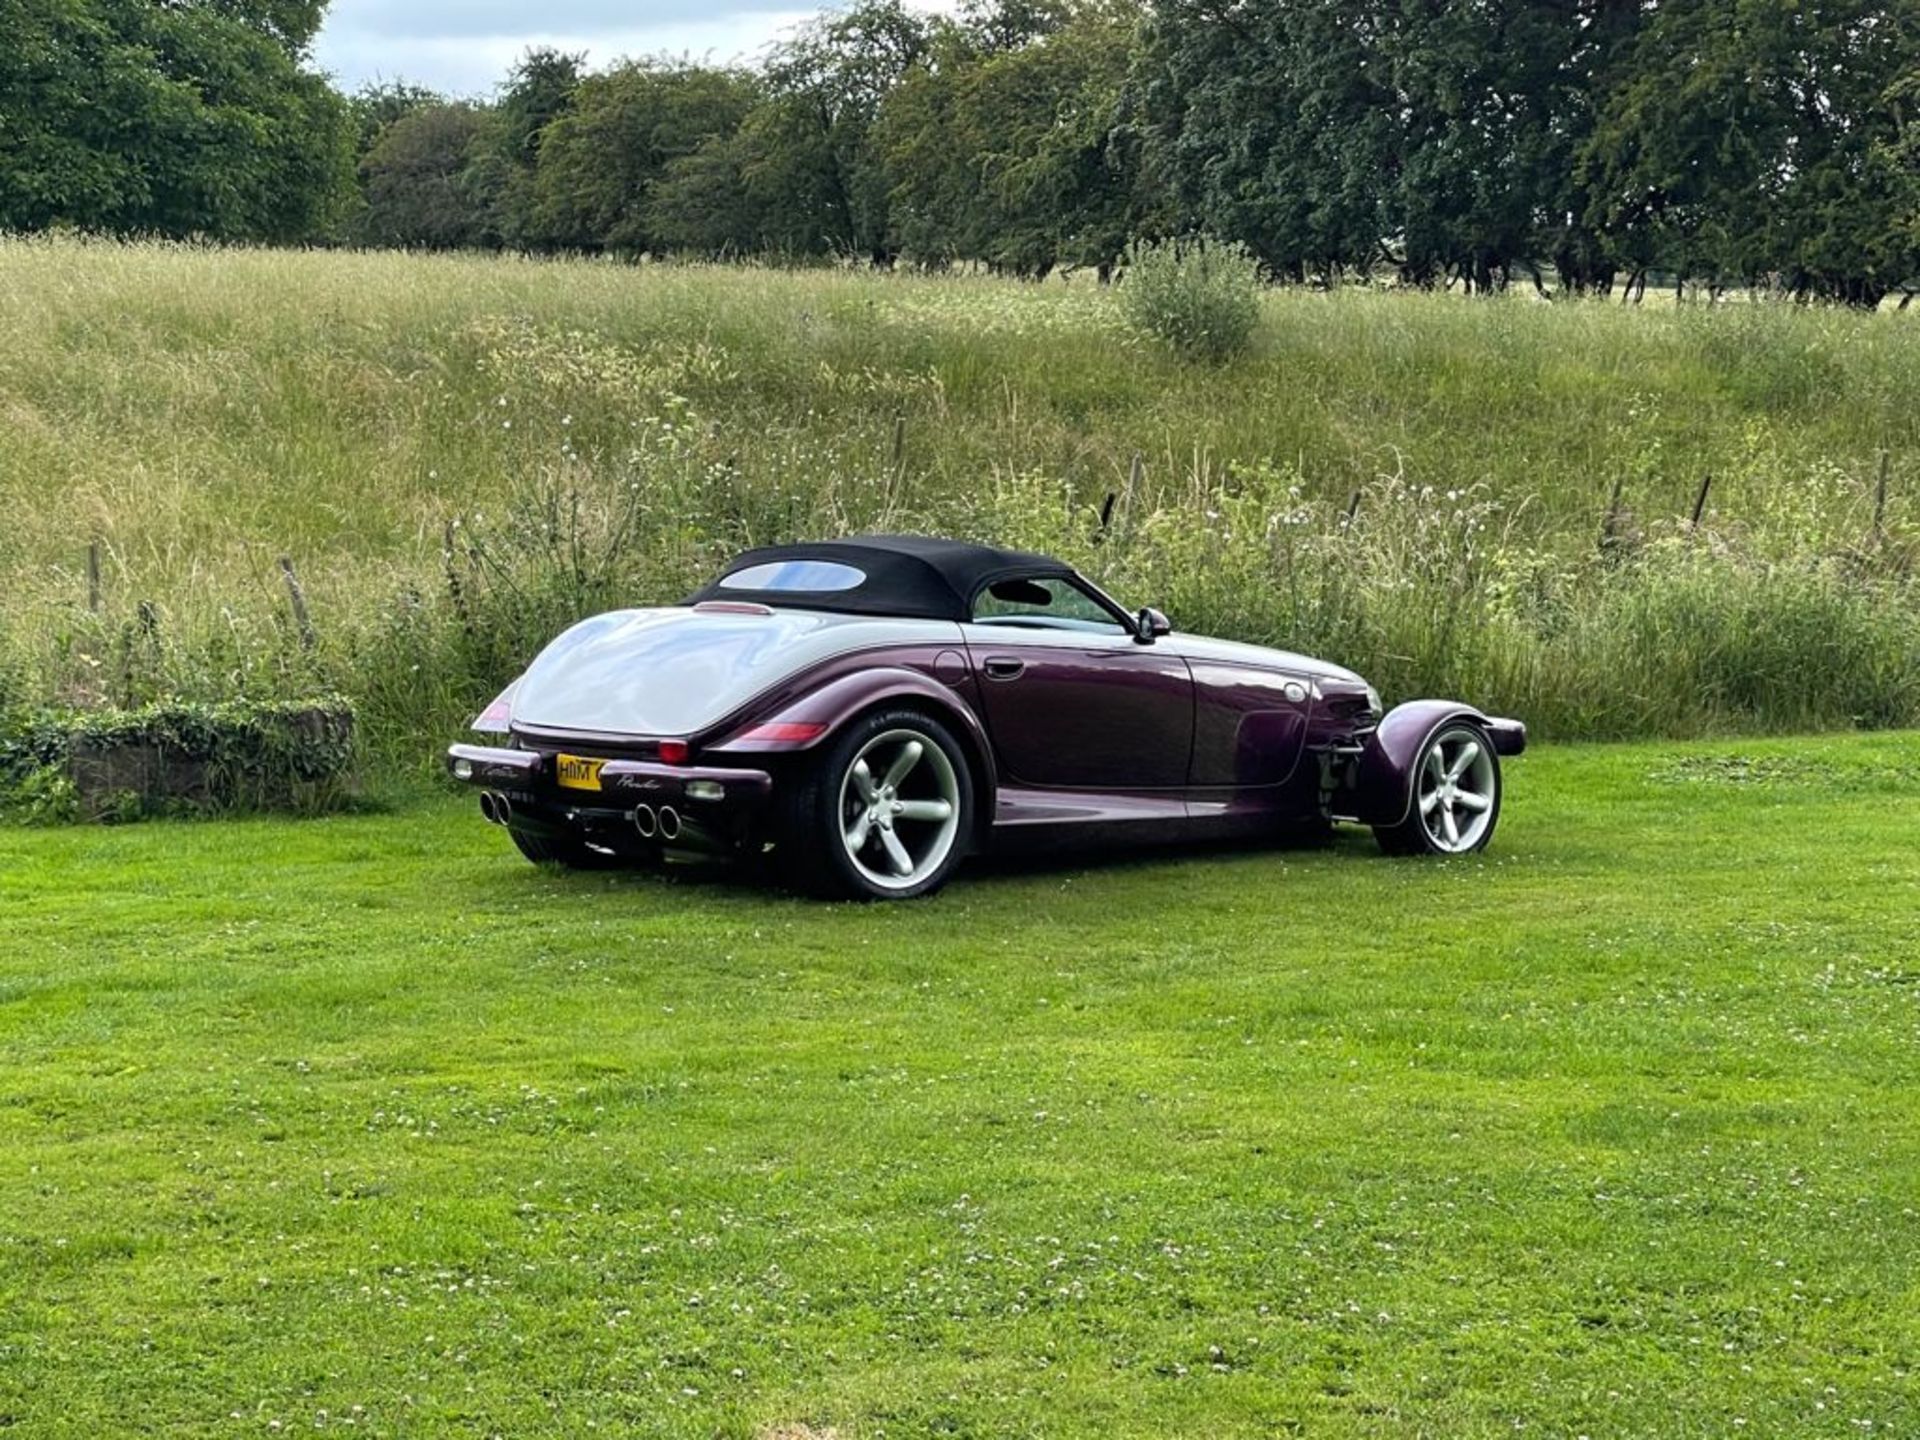 1998 CHRYSLER PLYMOUTH PROWLER V6 2 DOOR CONVERTIBLE, 3500cc PETROL ENGINE, AUTO *NO VAT* - Image 21 of 27